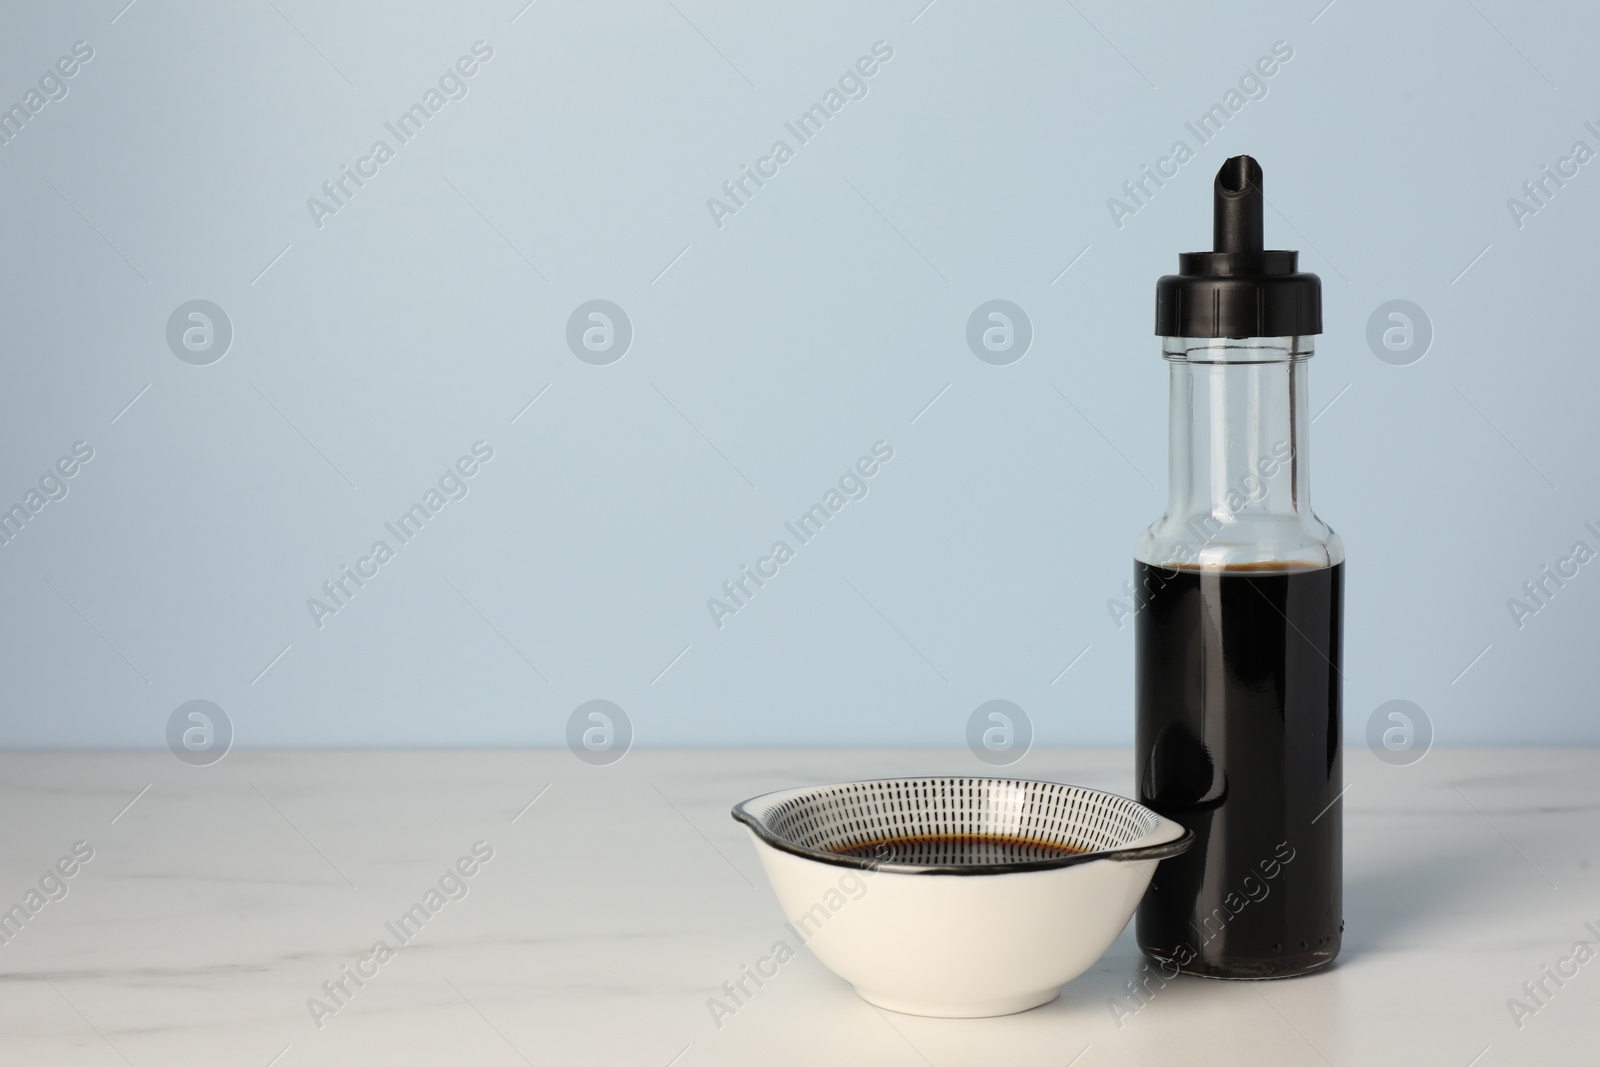 Photo of Bottle and bowl with soy sauce on white table, space for text